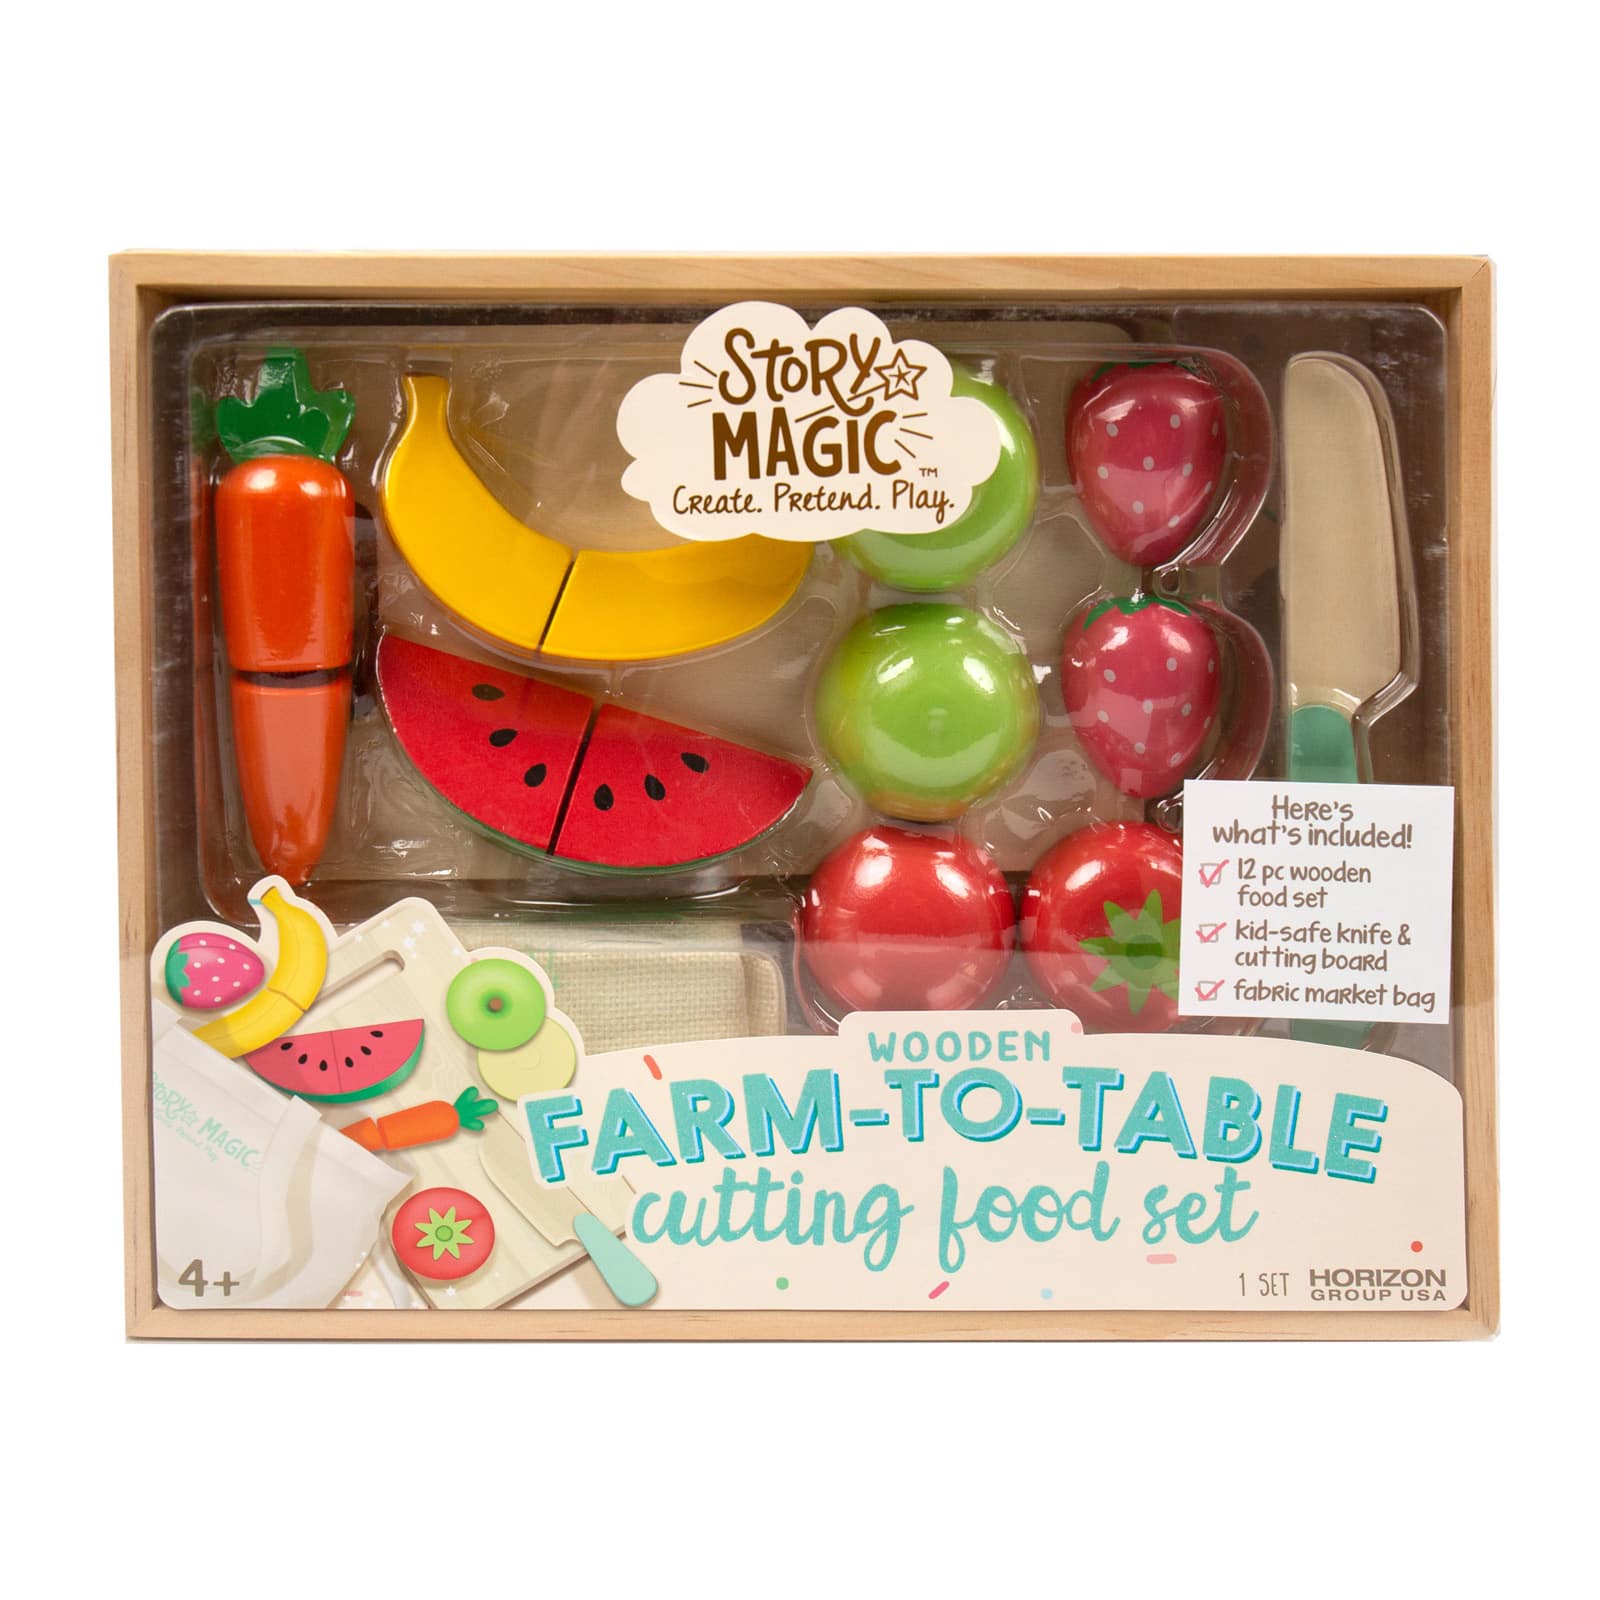 Story Magic Farm-to-Table Cutting Food Playset